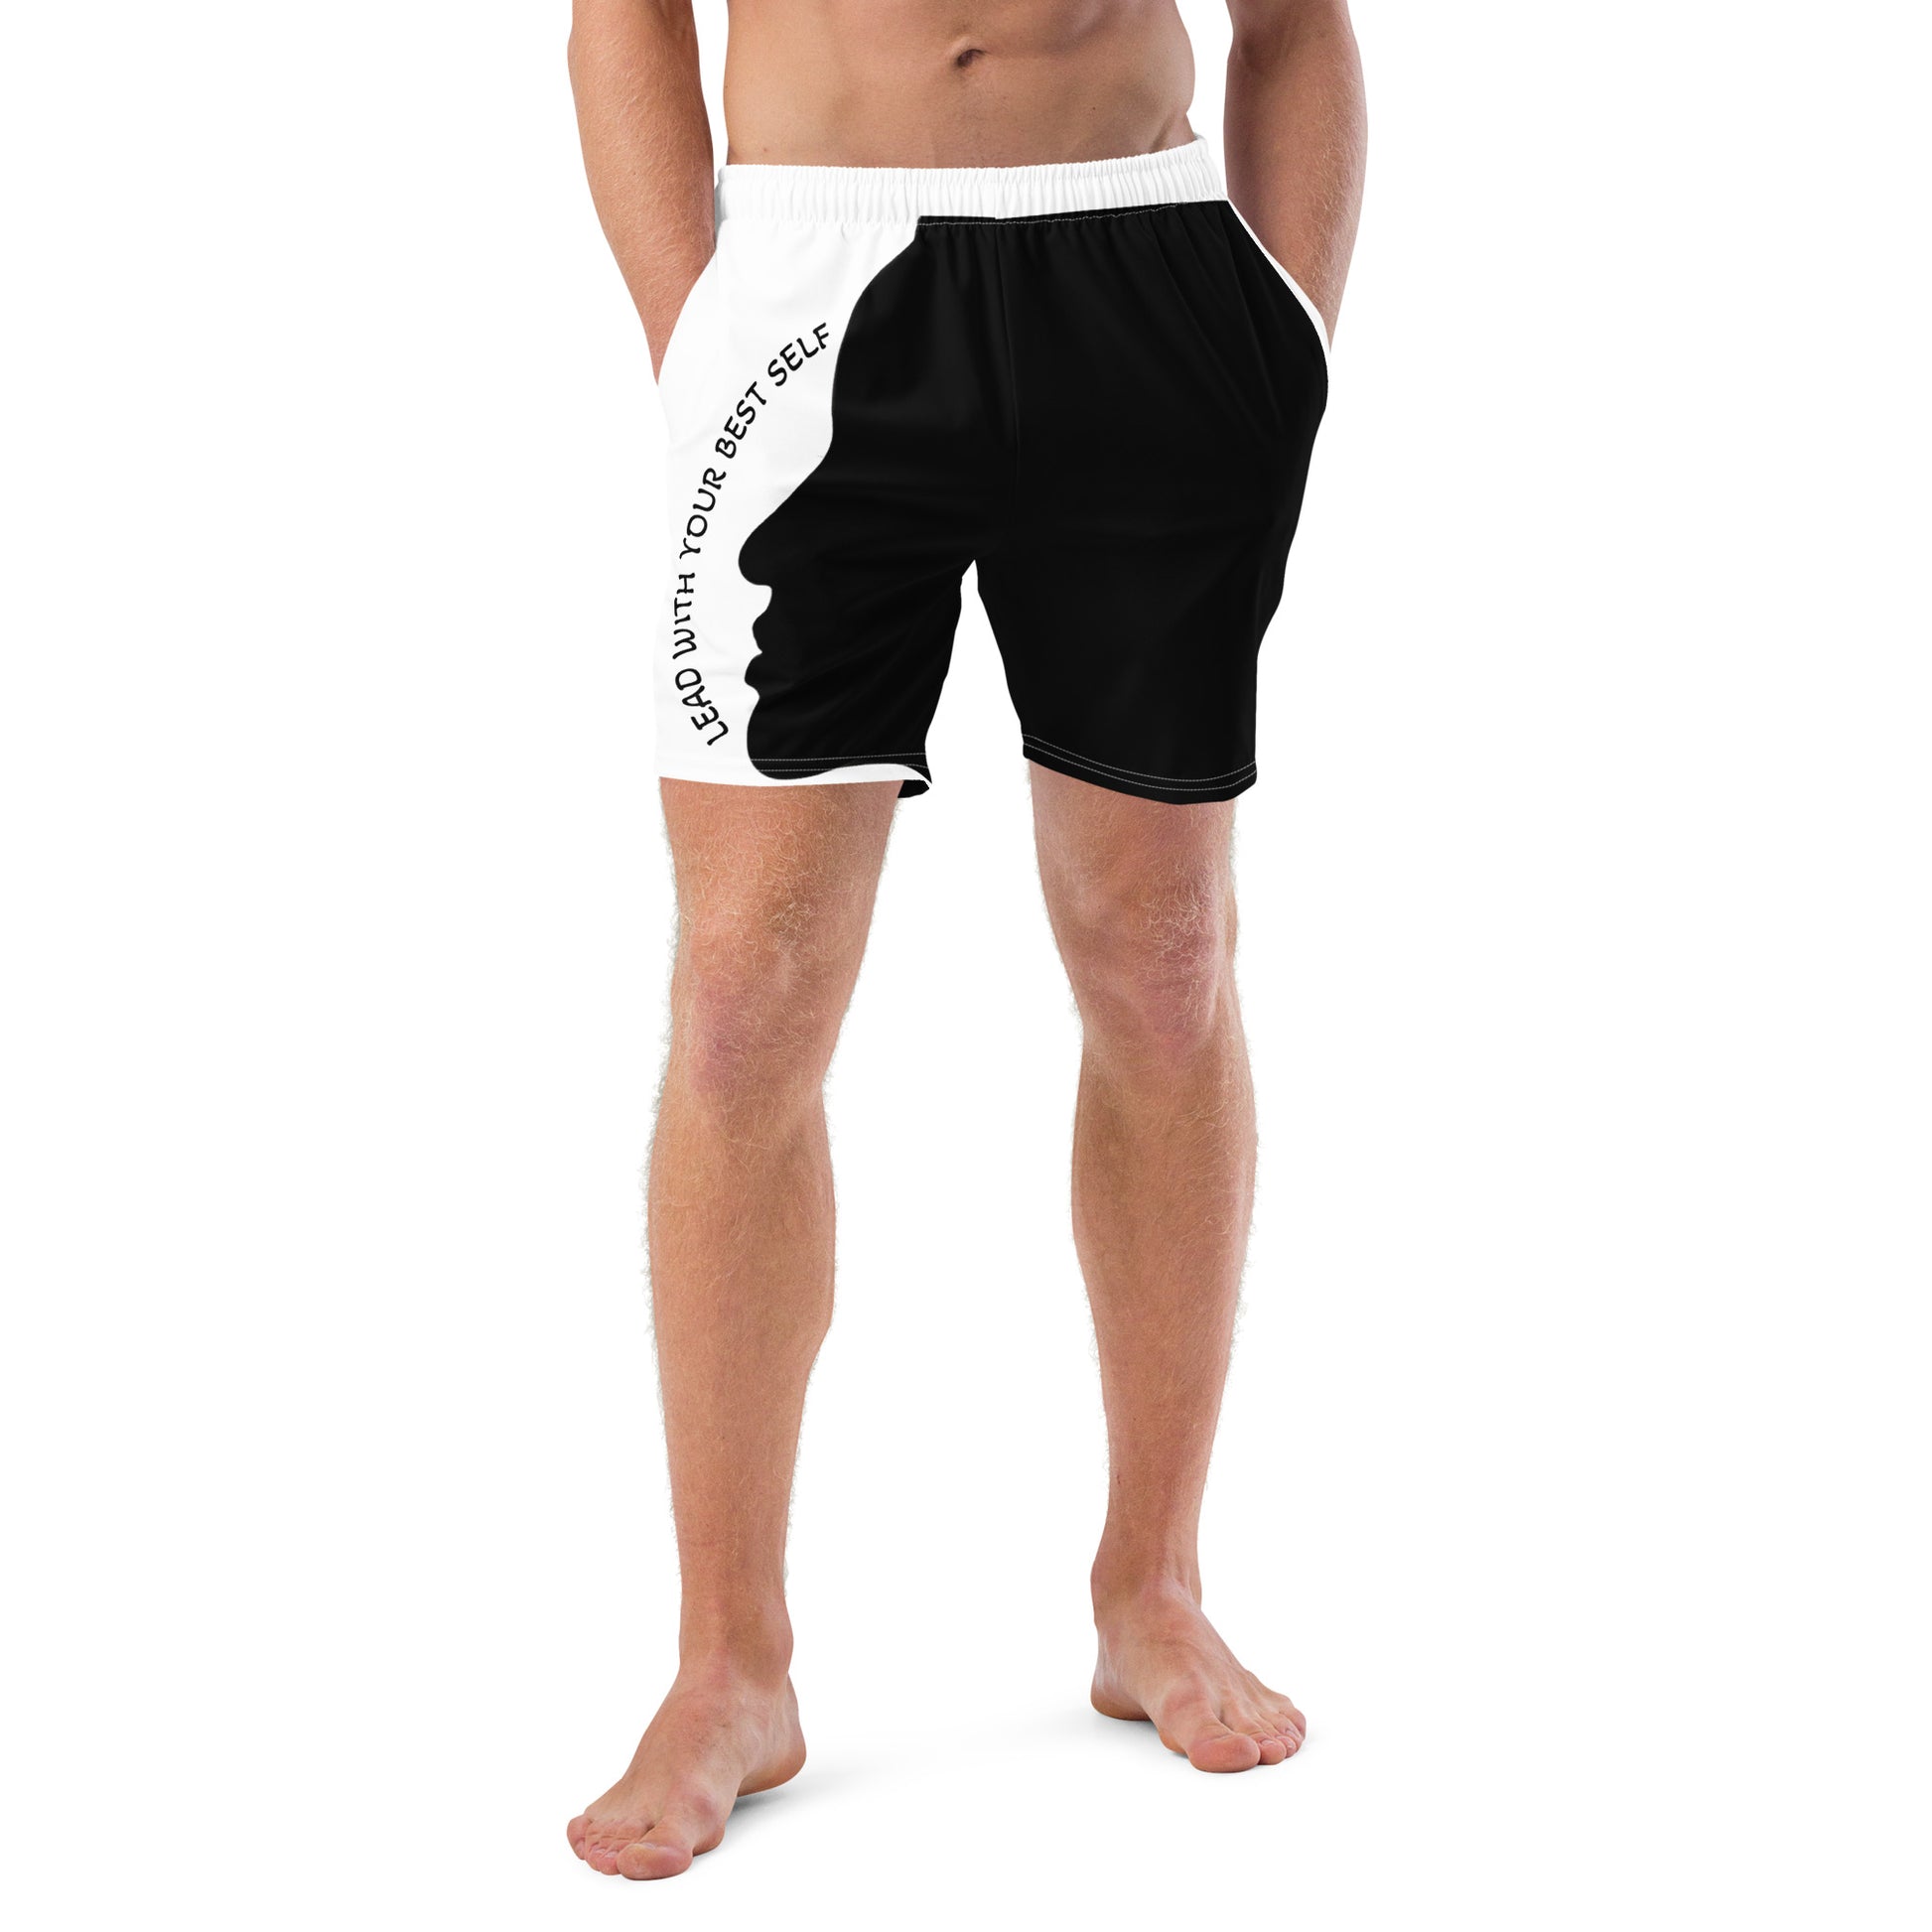 LBS Men's Swim Trunks - Stylish and confident male artist wearing vibrant swim trunks by SpotlYght Seeker